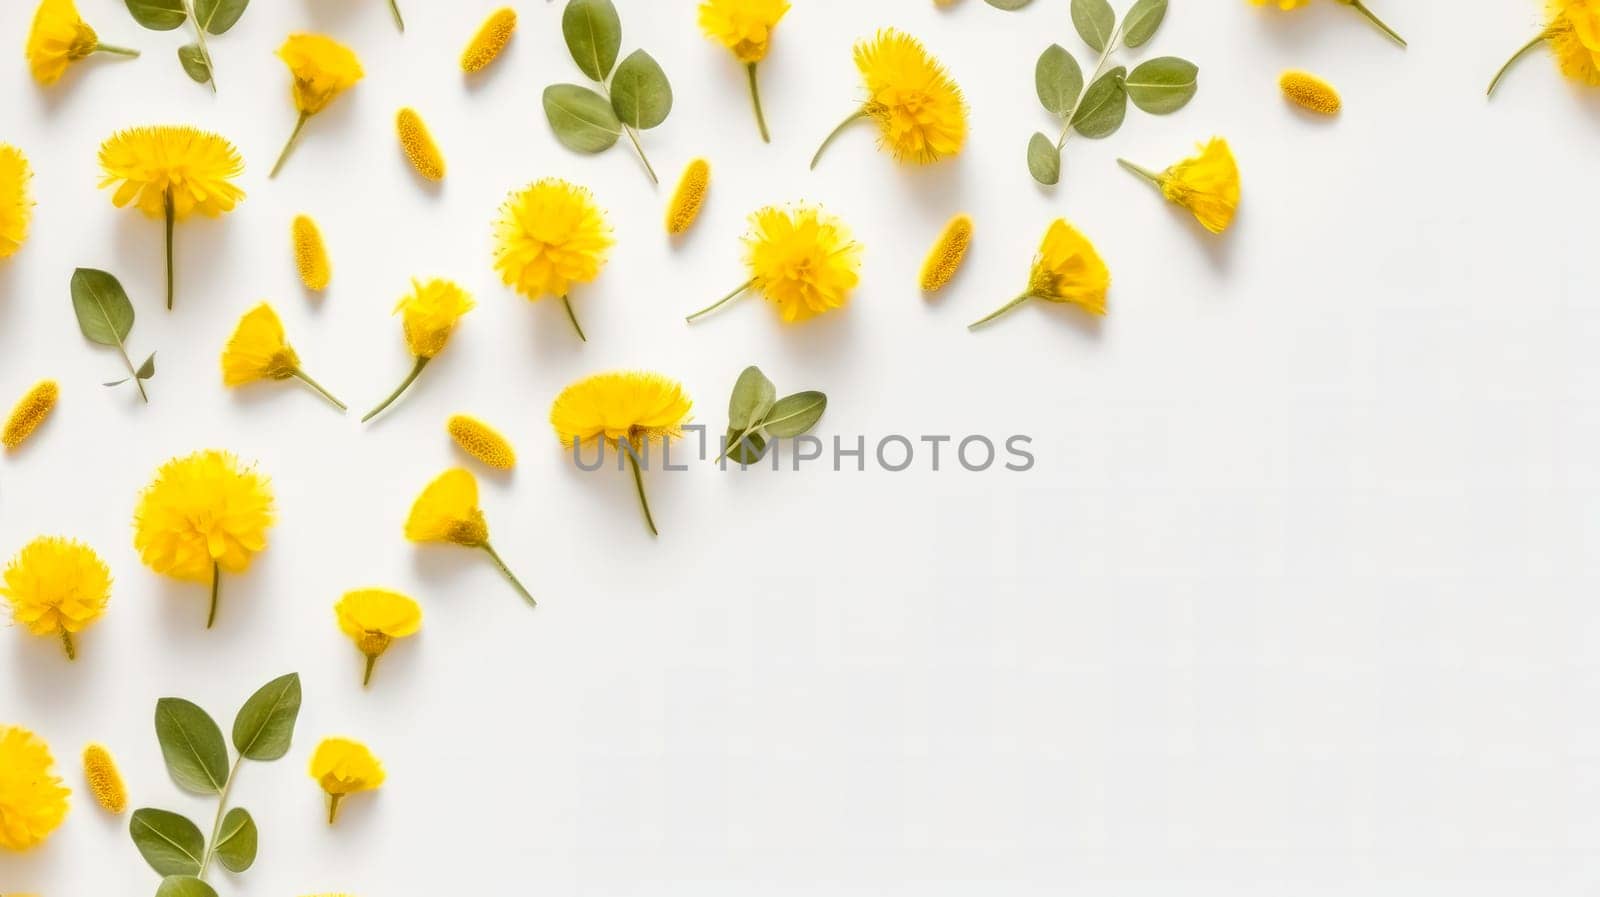 Vibrant and isolated set of yellow crocus flowers on a clean white background, showcasing the delicate beauty of these blossoms. Perfect for various floral concepts.